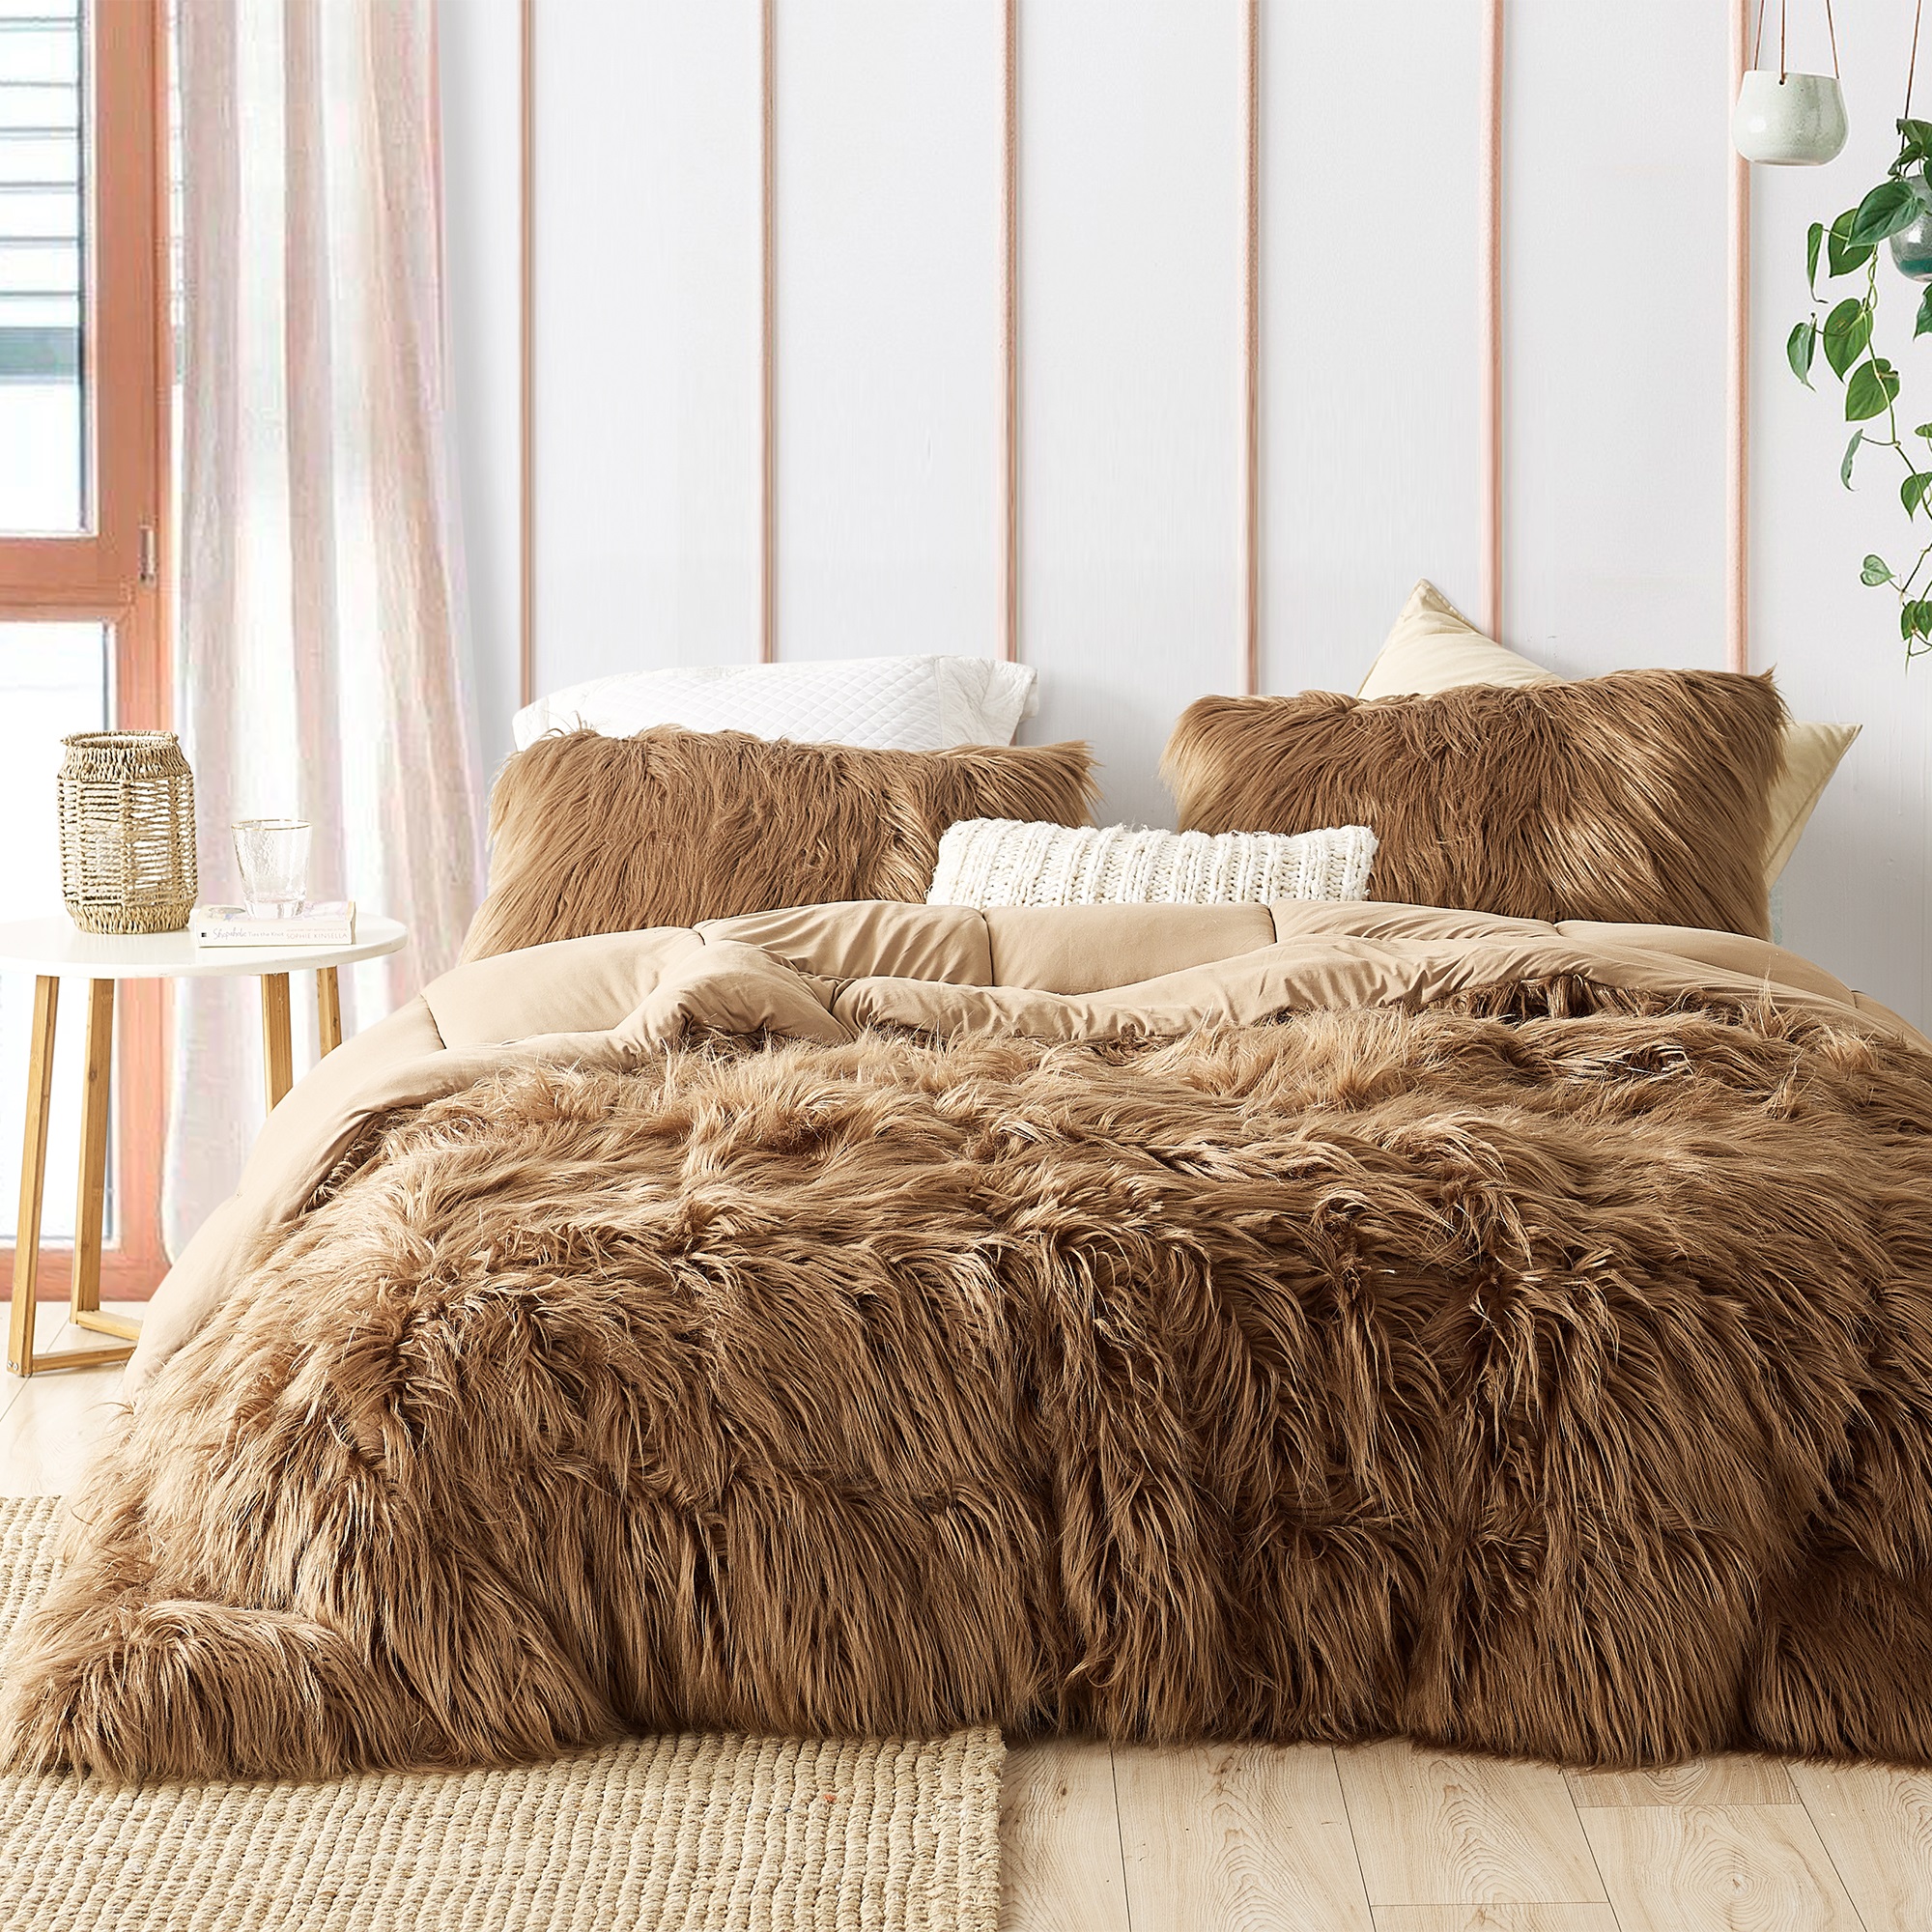 Grizzly Bear - Coma Inducer Oversized Comforter - Toasted Coconut